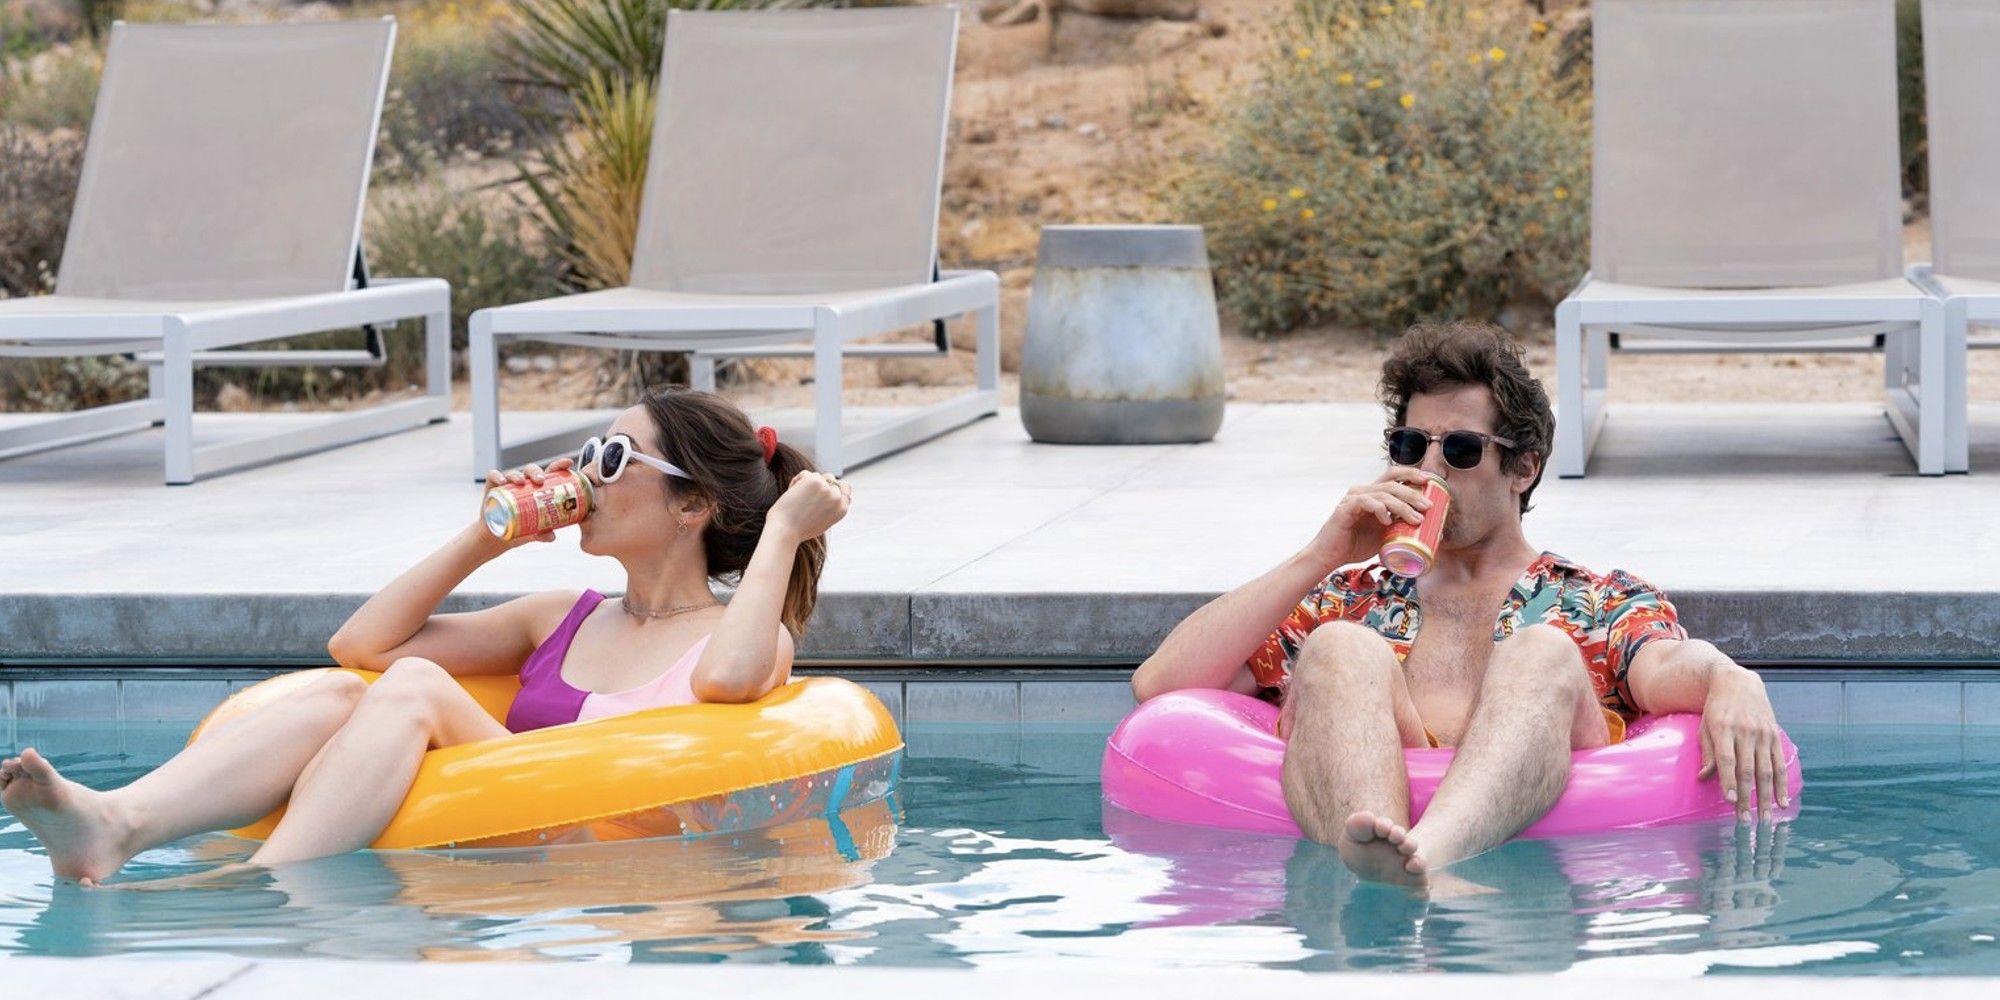 Andy Samberg and Cristin Milioti as Nyles and Sarah drinking while floating on a pool in 'Palm Springs'